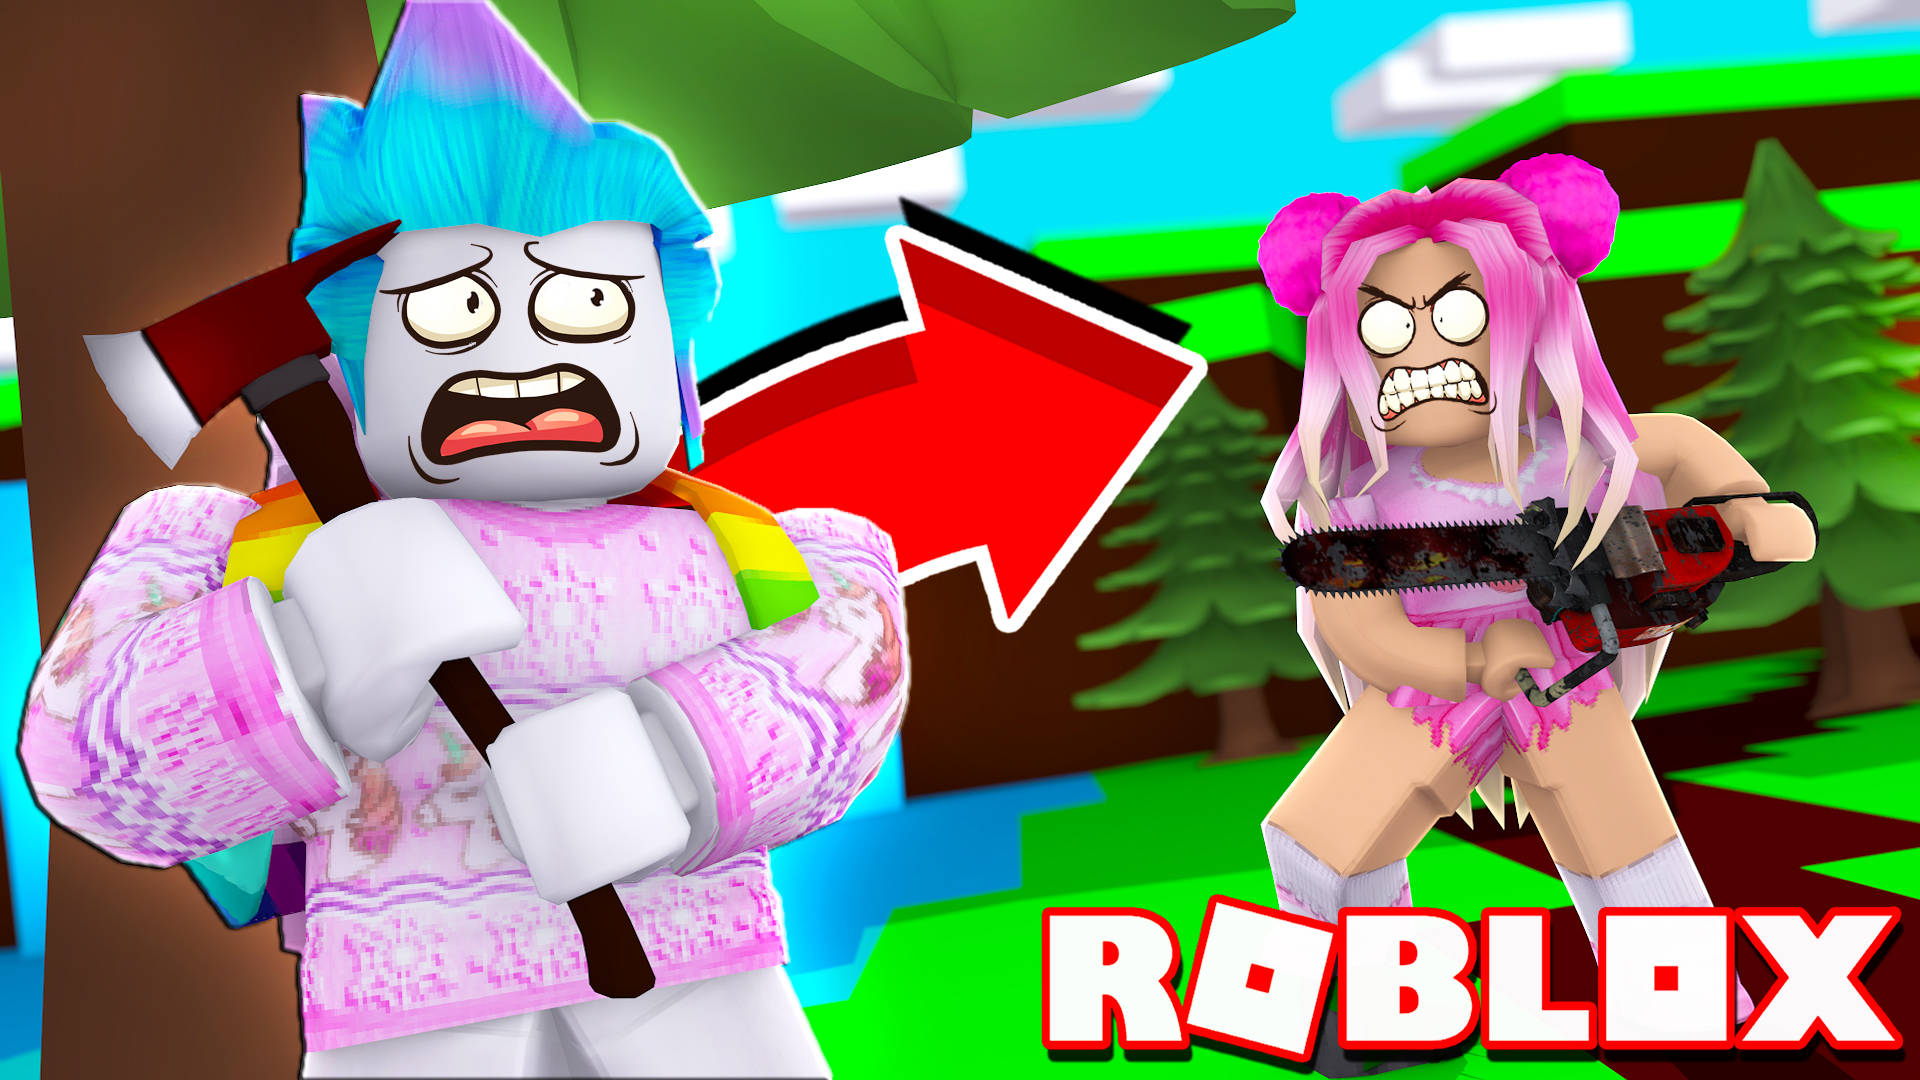 Leahashe Roblox Cover: Leah Ashe Roblox Omslagsbild Wallpaper